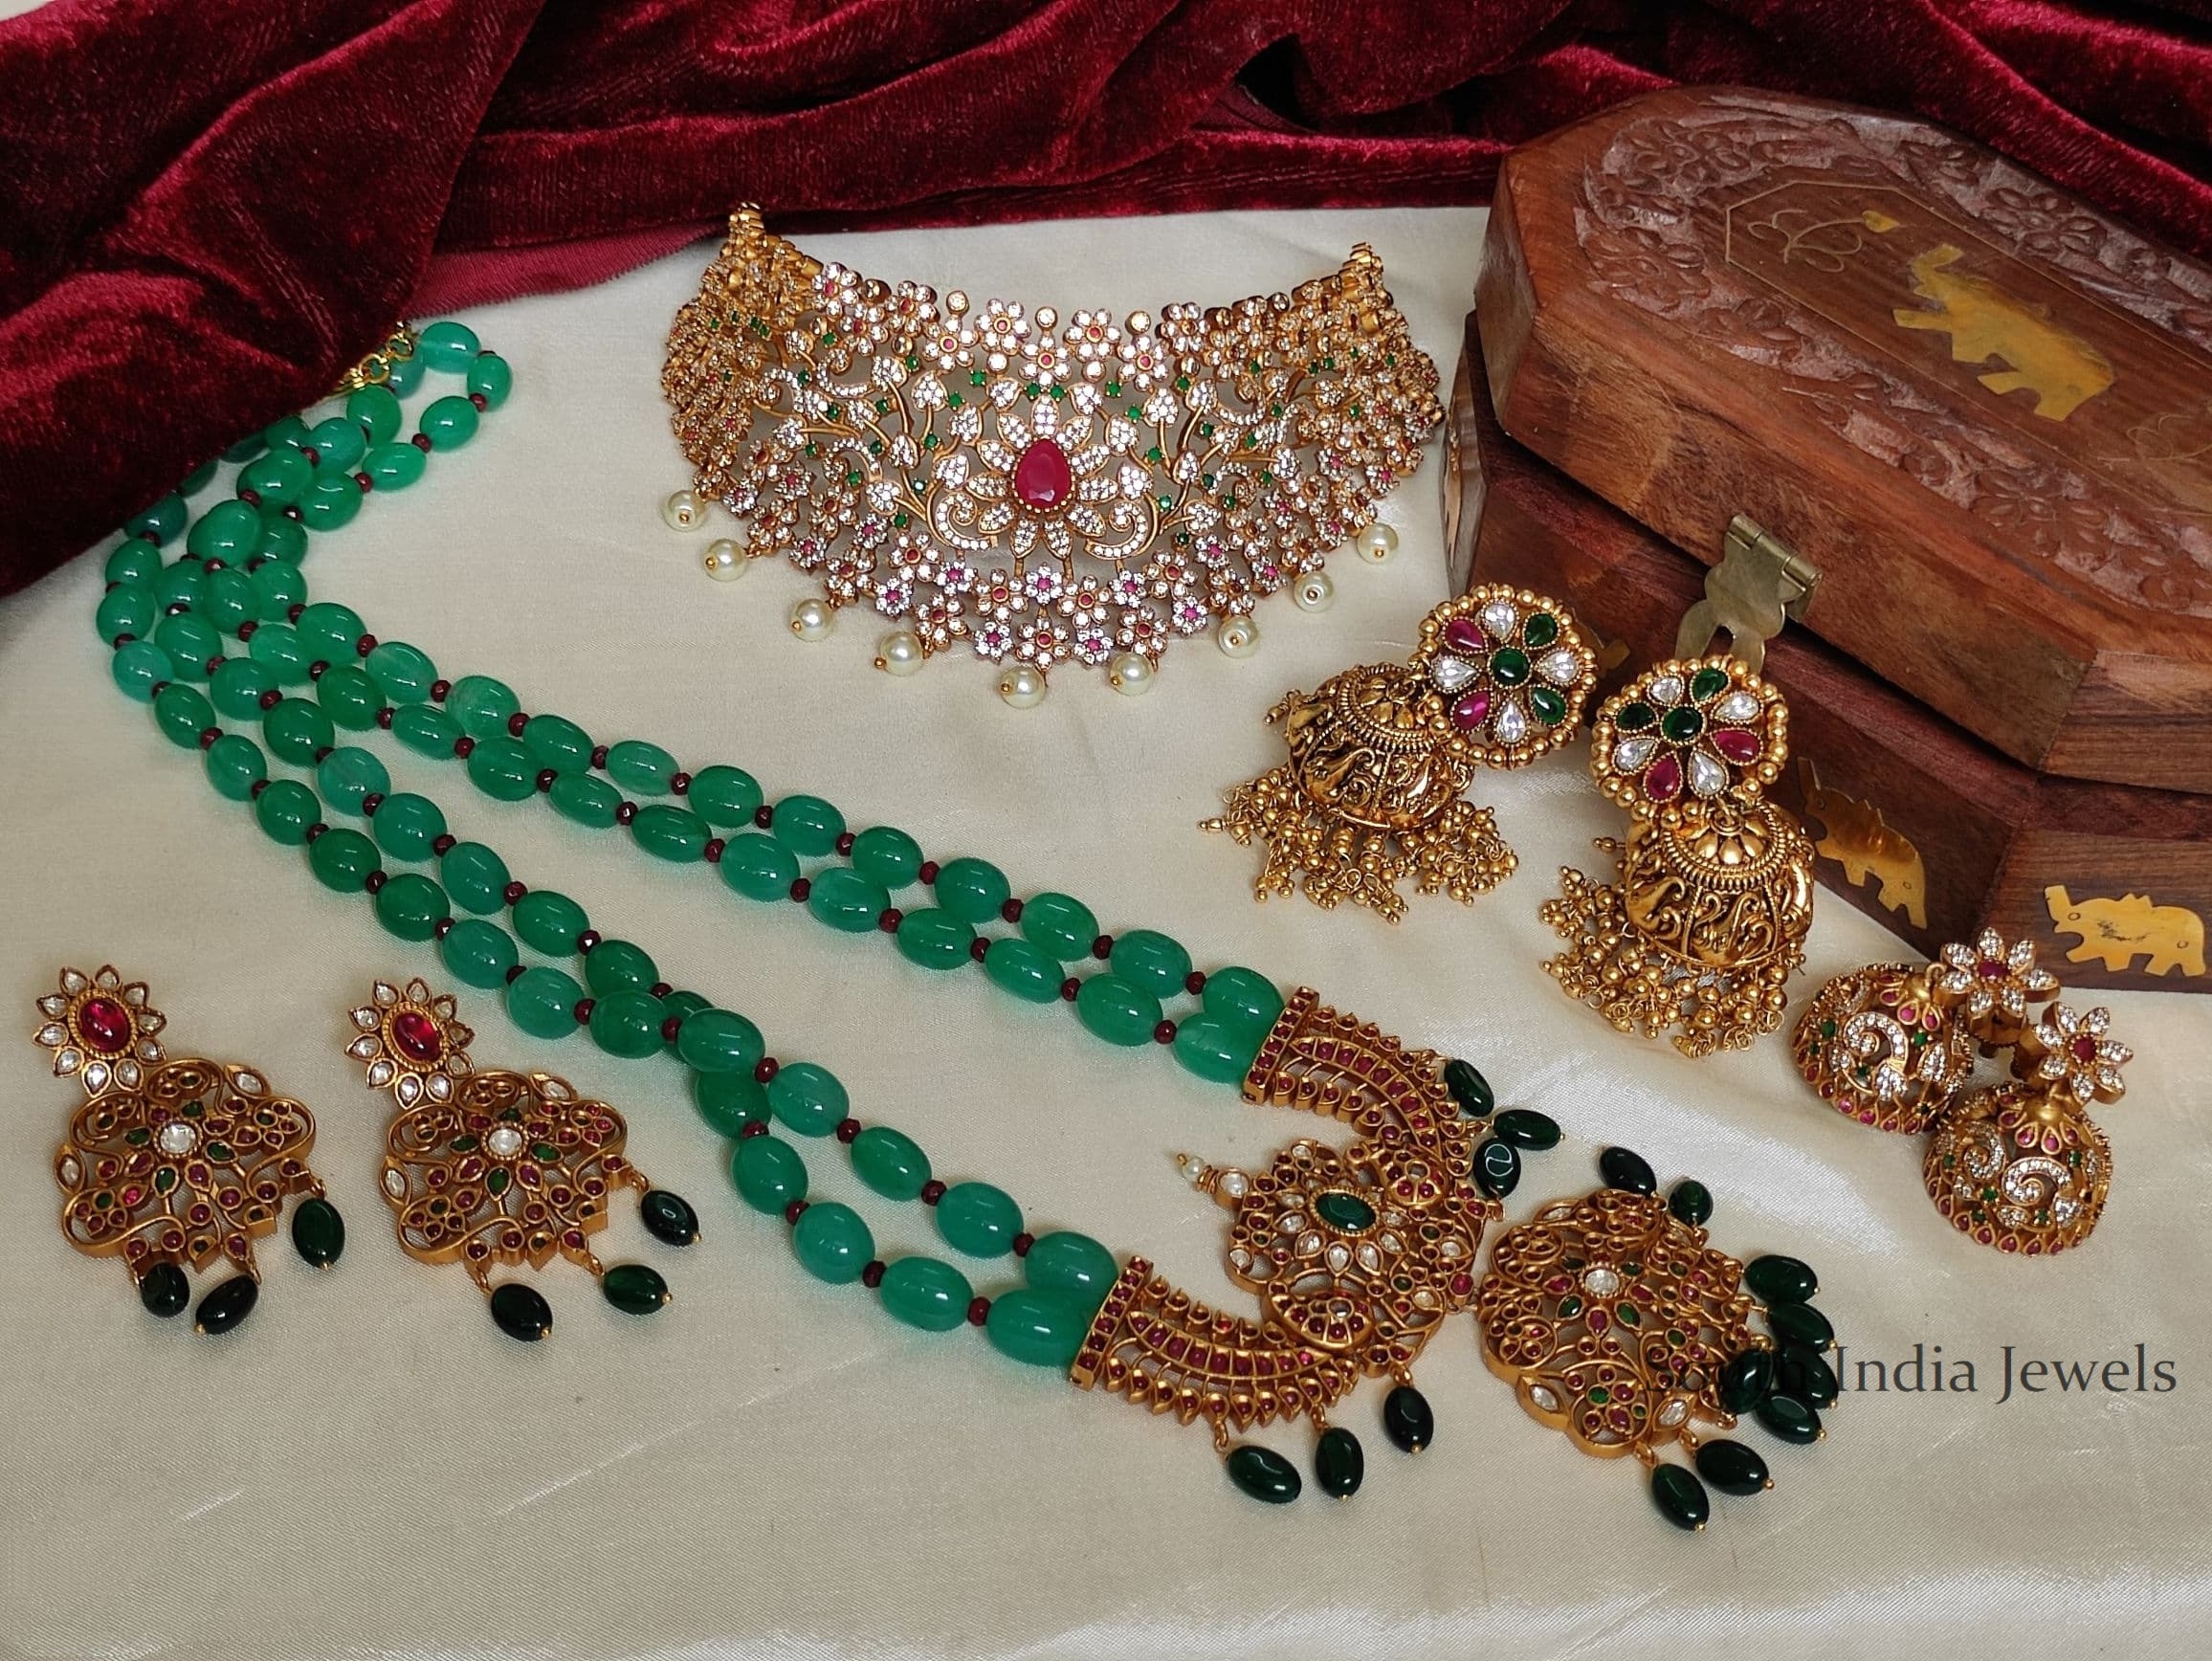 Stunning Grand Bridal Set By South India Jewels!